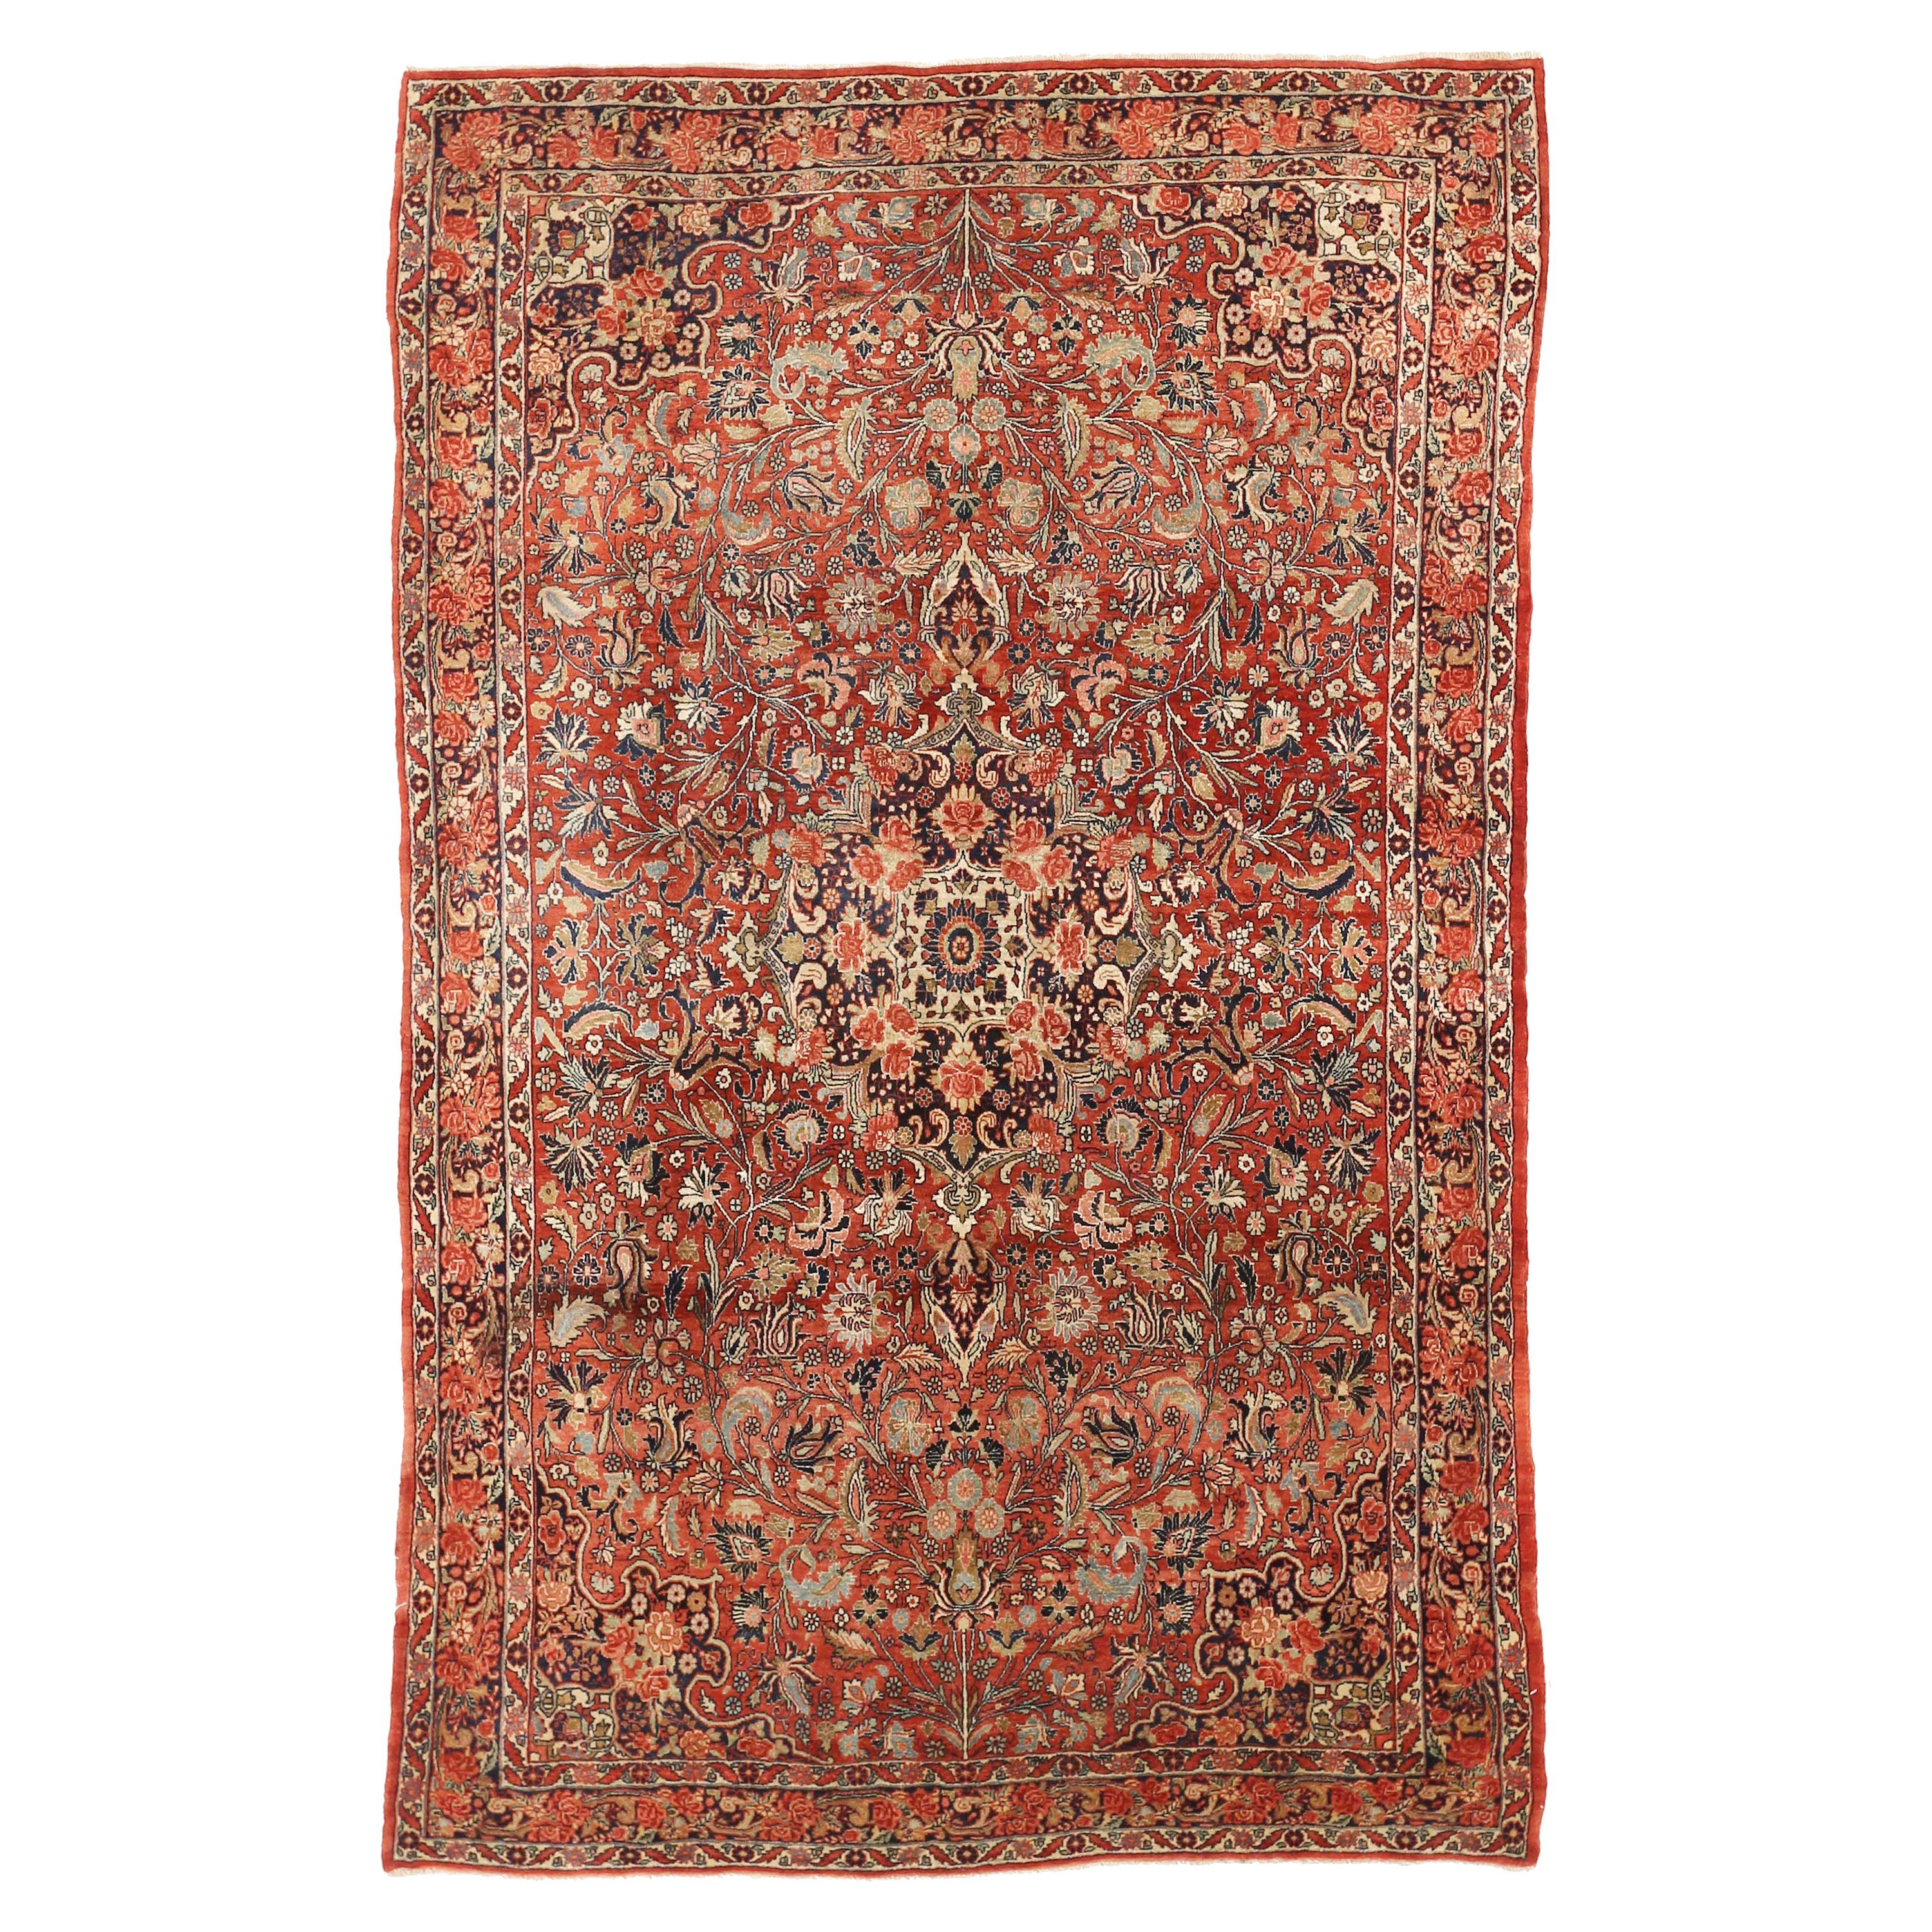 Antique Persian Bijar Rug with Ivory and Black Floral Details on Red Field For Sale